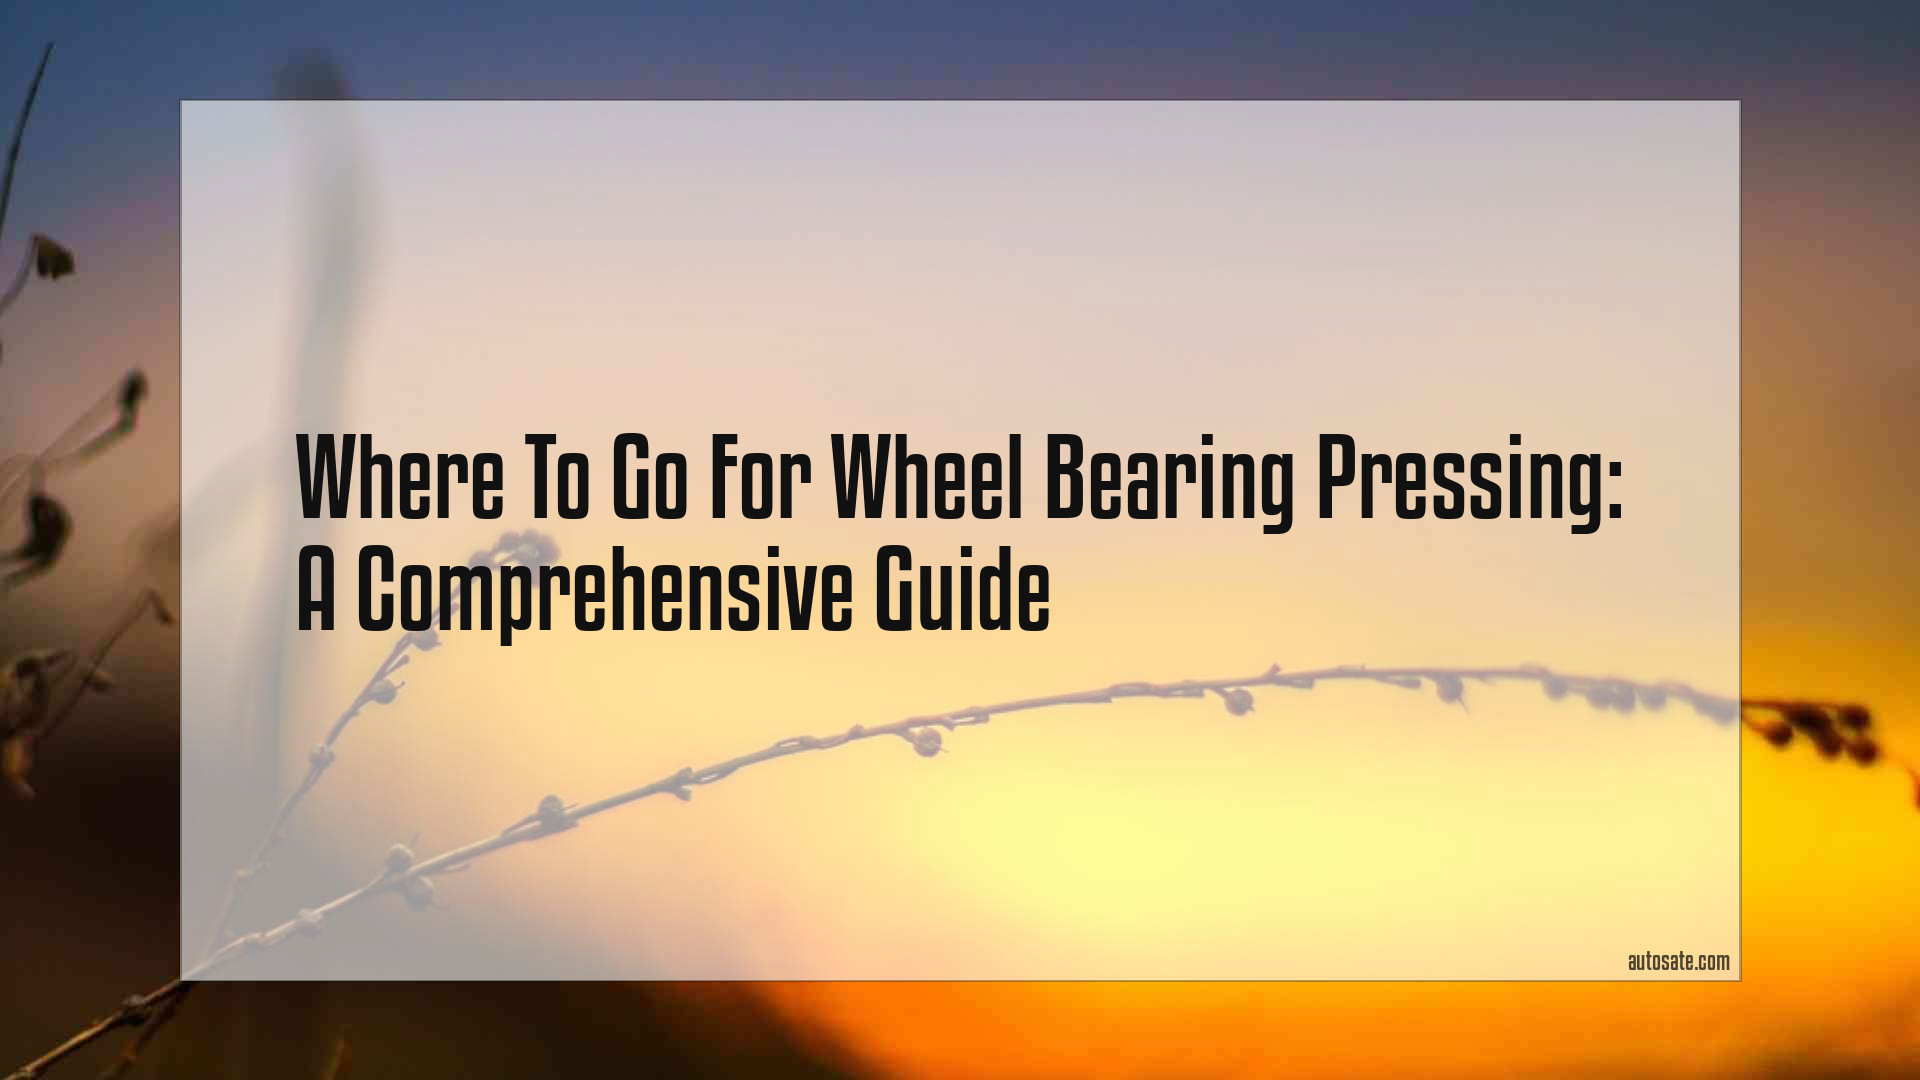 Where To Go For Wheel Bearing Pressing: A Comprehensive Guide